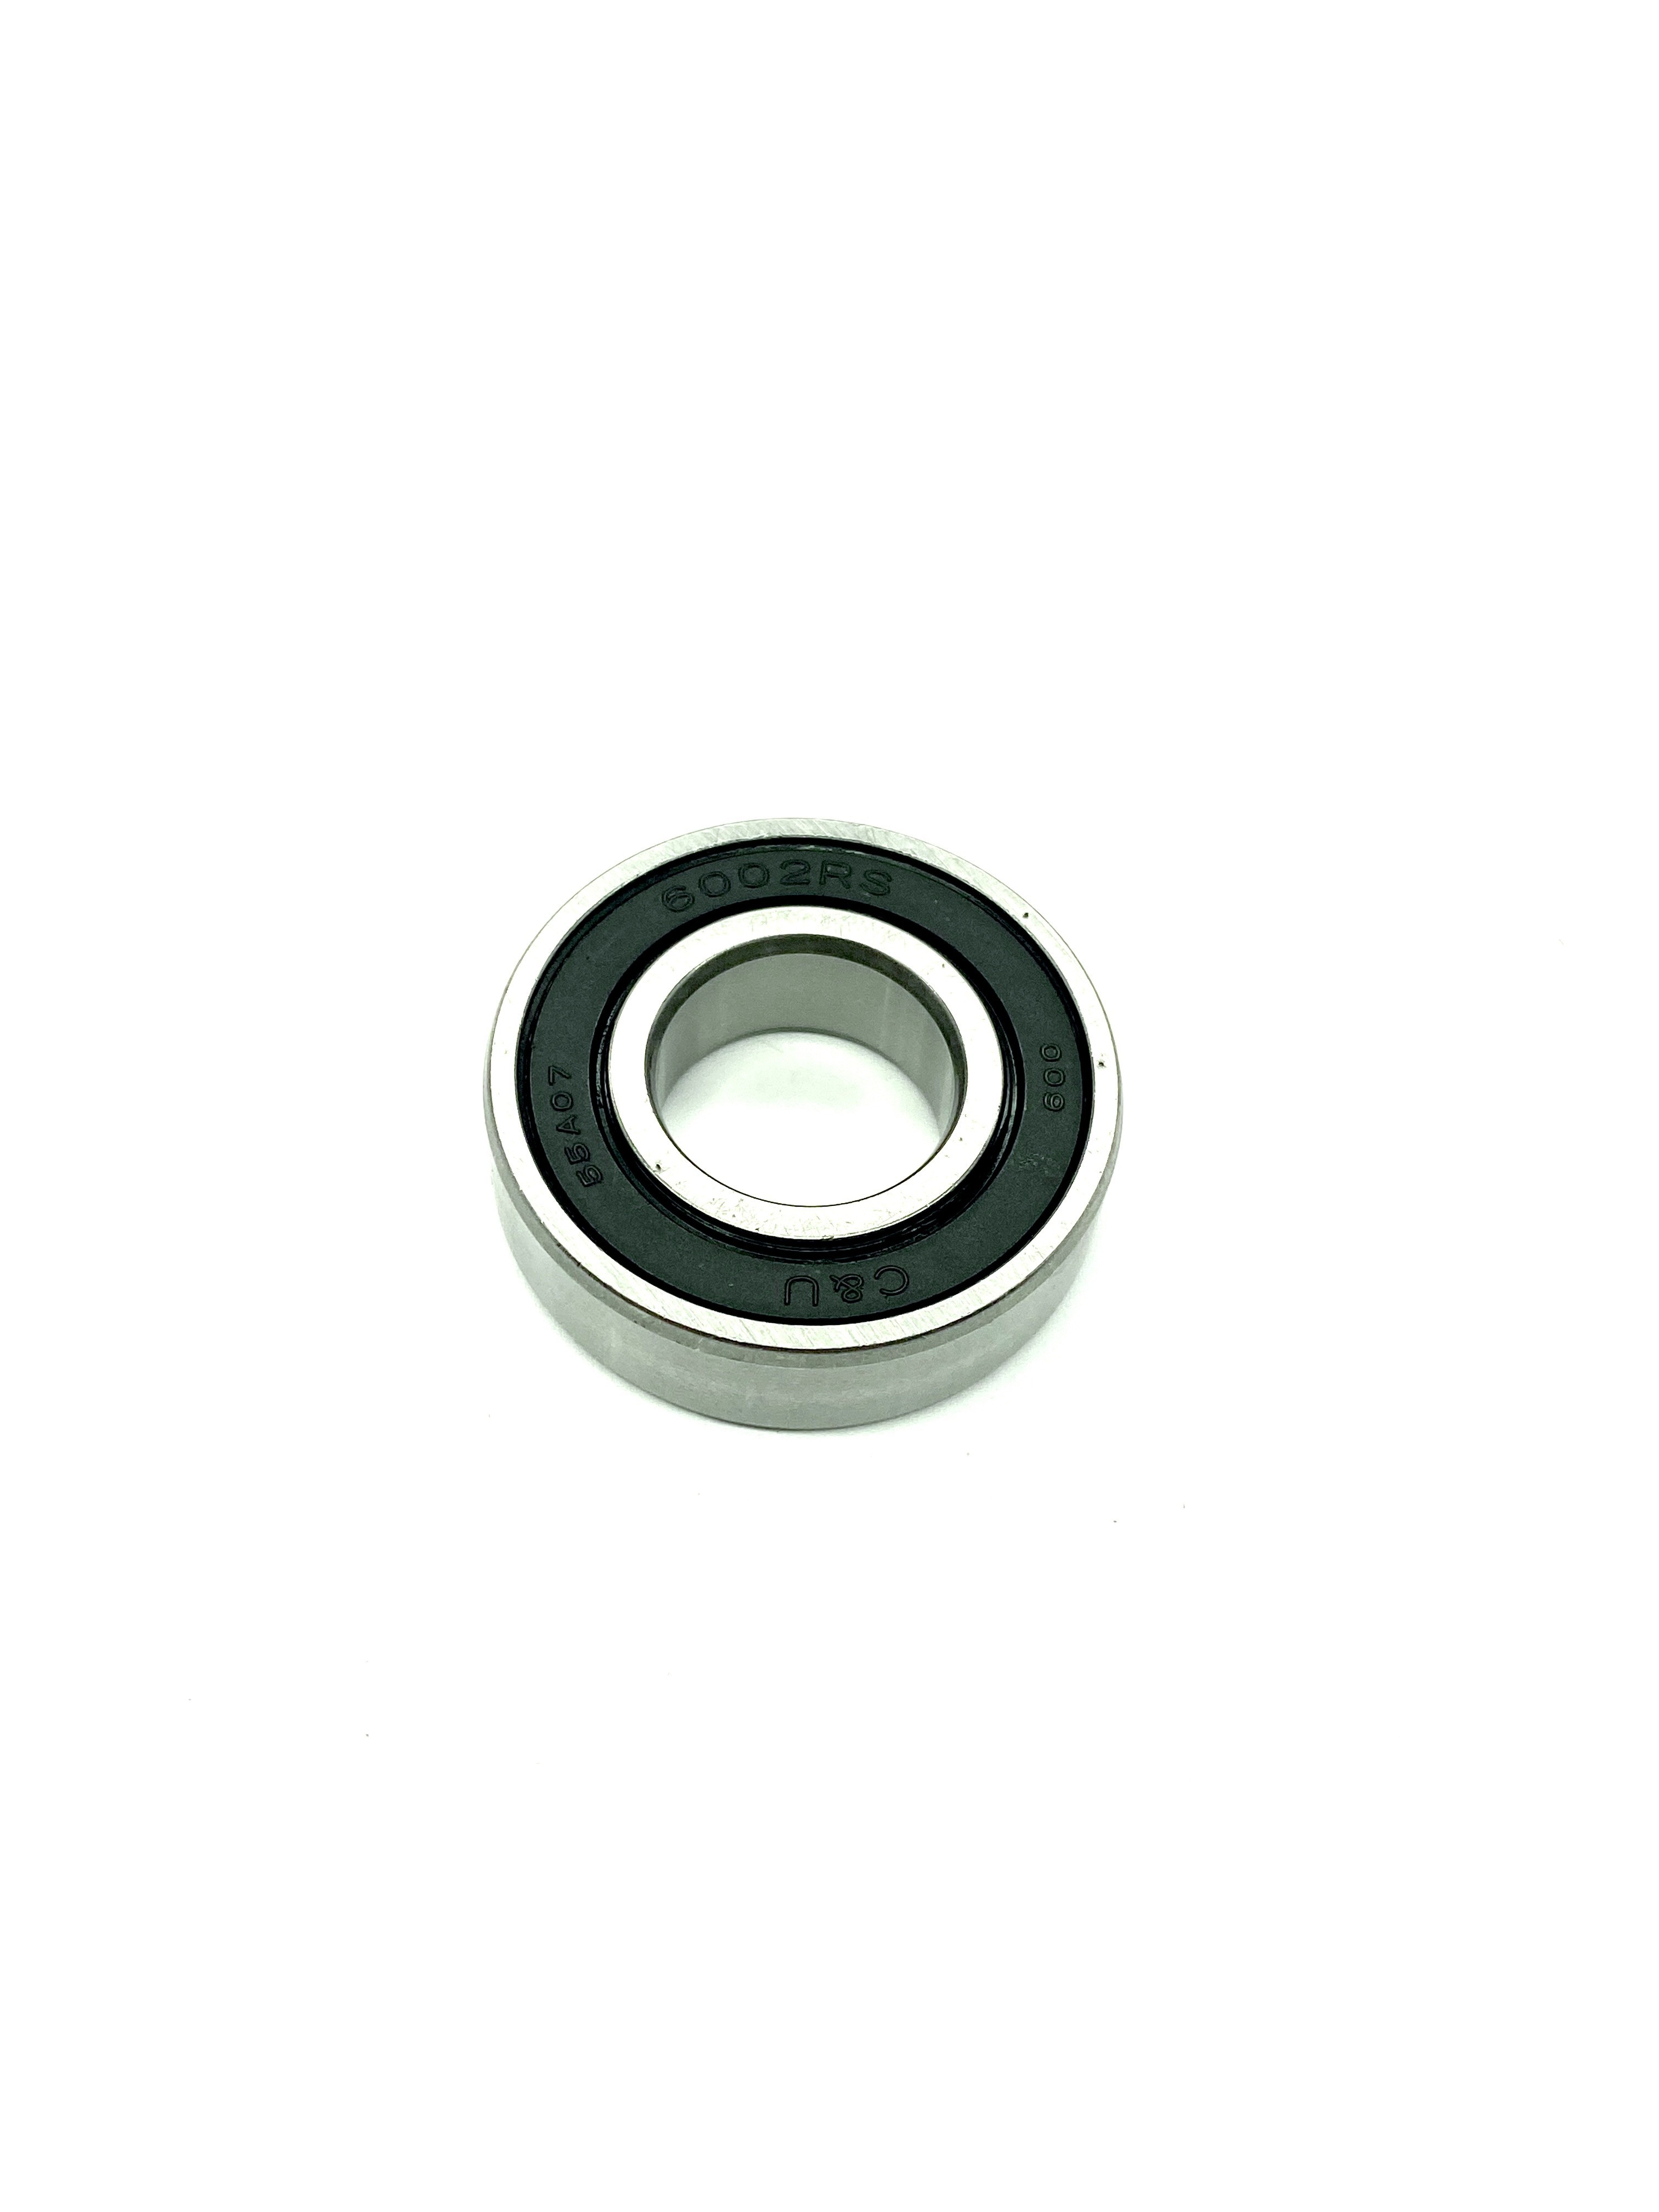 E-Twow Front Bearing 6002-2RS